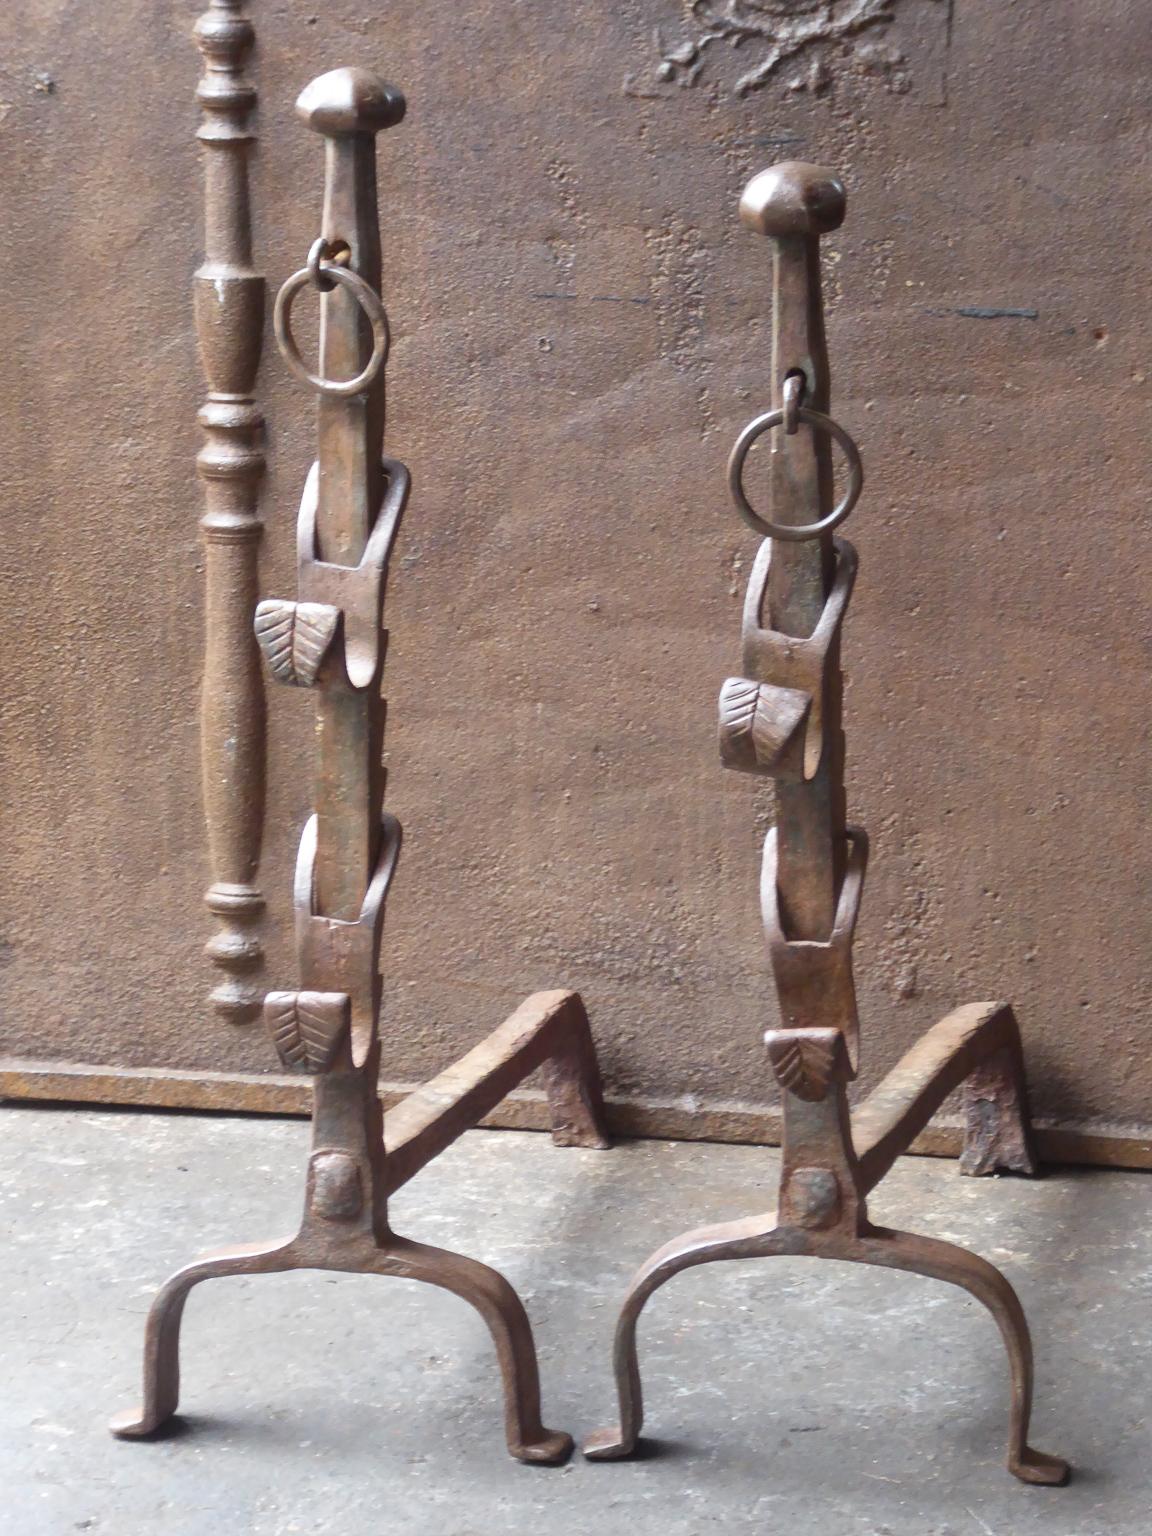 17th-18th century French andirons made of wrought iron. The style of the andirons is Gothic. The andirons have spit hooks to grill food. They have a natural brown patina. Upon request it can be made black. The andirons are beautifully carved.